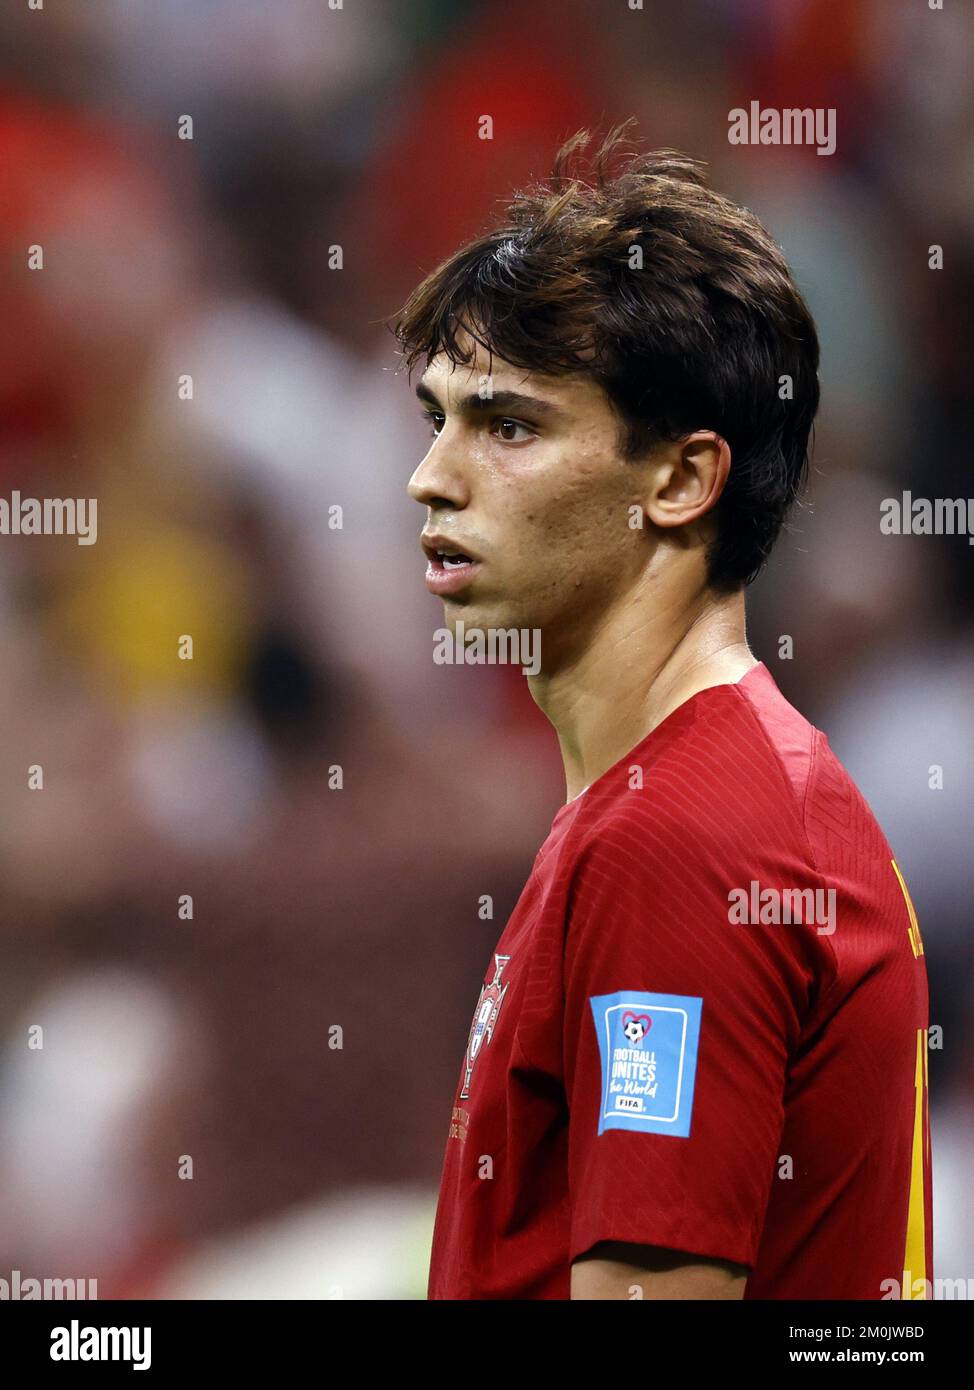 AL DAAYEN - Joao Felix of Portugal during the FIFA World Cup Qatar 2022 round of 16 match between Portugal and Switzerland at Lusail Stadium on December 6, 2022 in Al Daayen, Qatar. AP | Dutch Height | MAURICE OF STONE Stock Photo